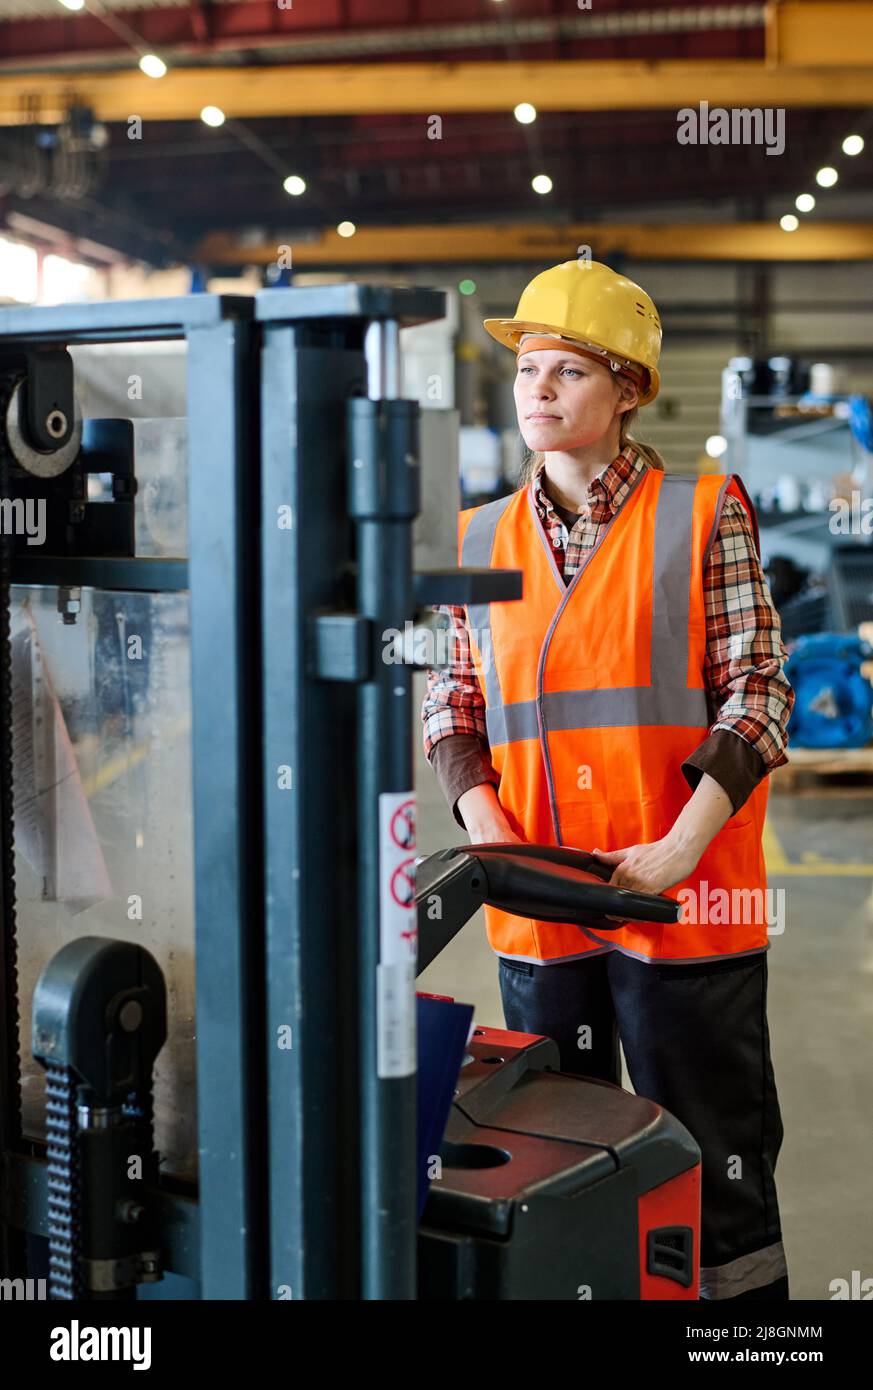 Female engineer looking forwards while standing in front of electric forklift and moving along aisle of workshop or warehouse Stock Photo